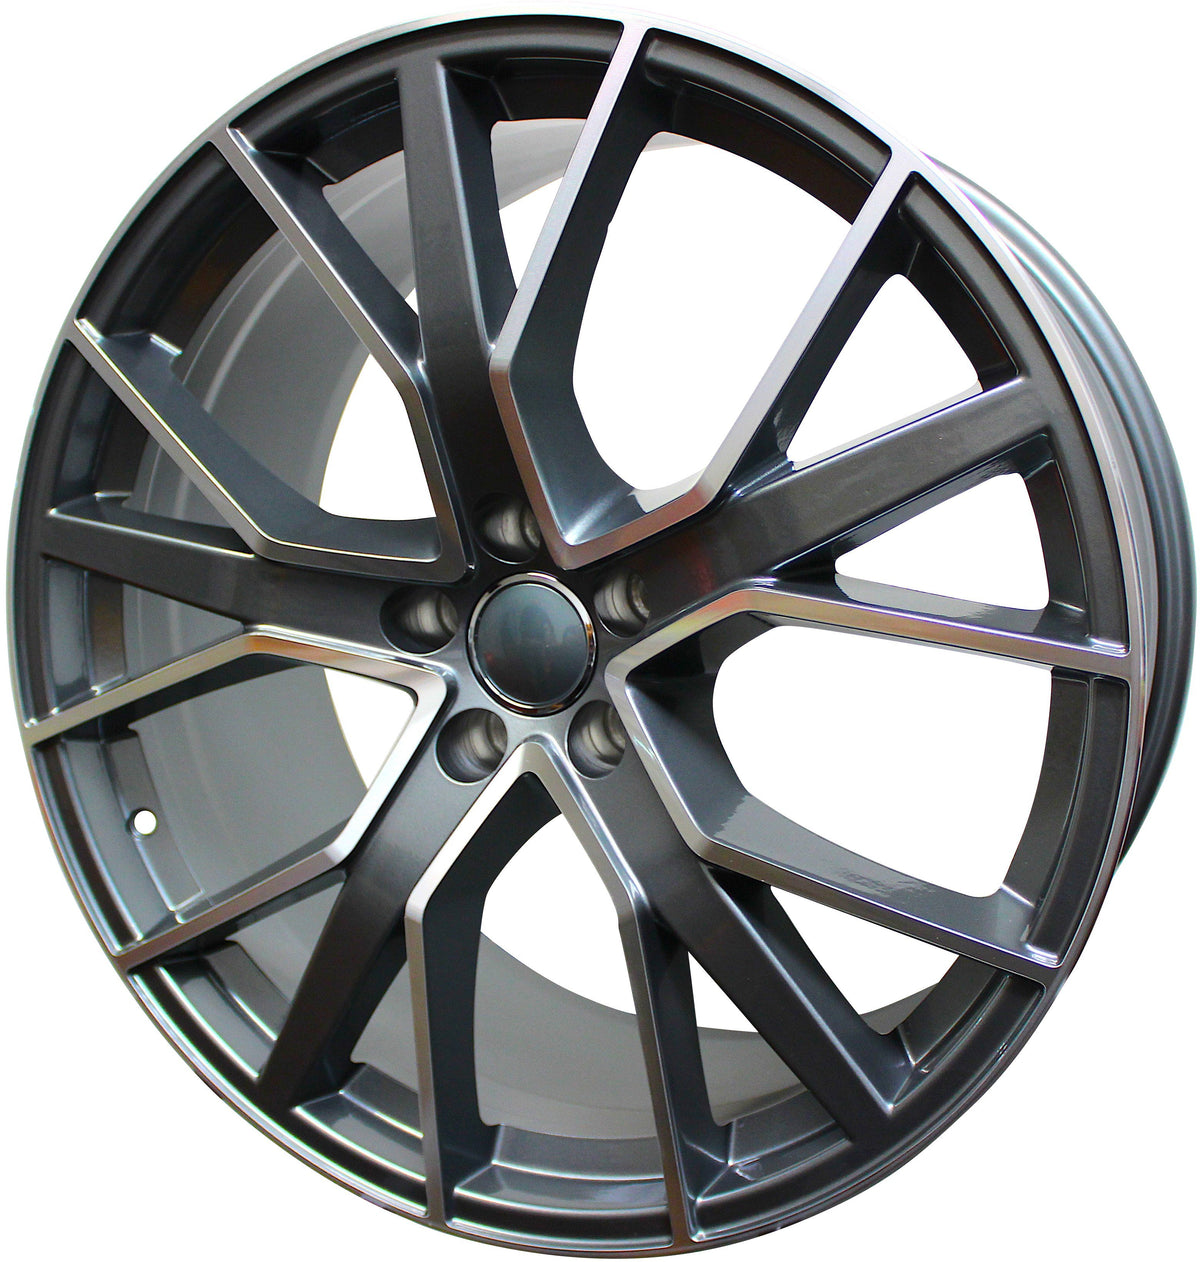 21 INCH WHEELS AUDI S LINE  Q5 Q6 Q7 S5 S6 A5 A6 A7 GUNMETAL MACHINED RIMS S8 STYLE